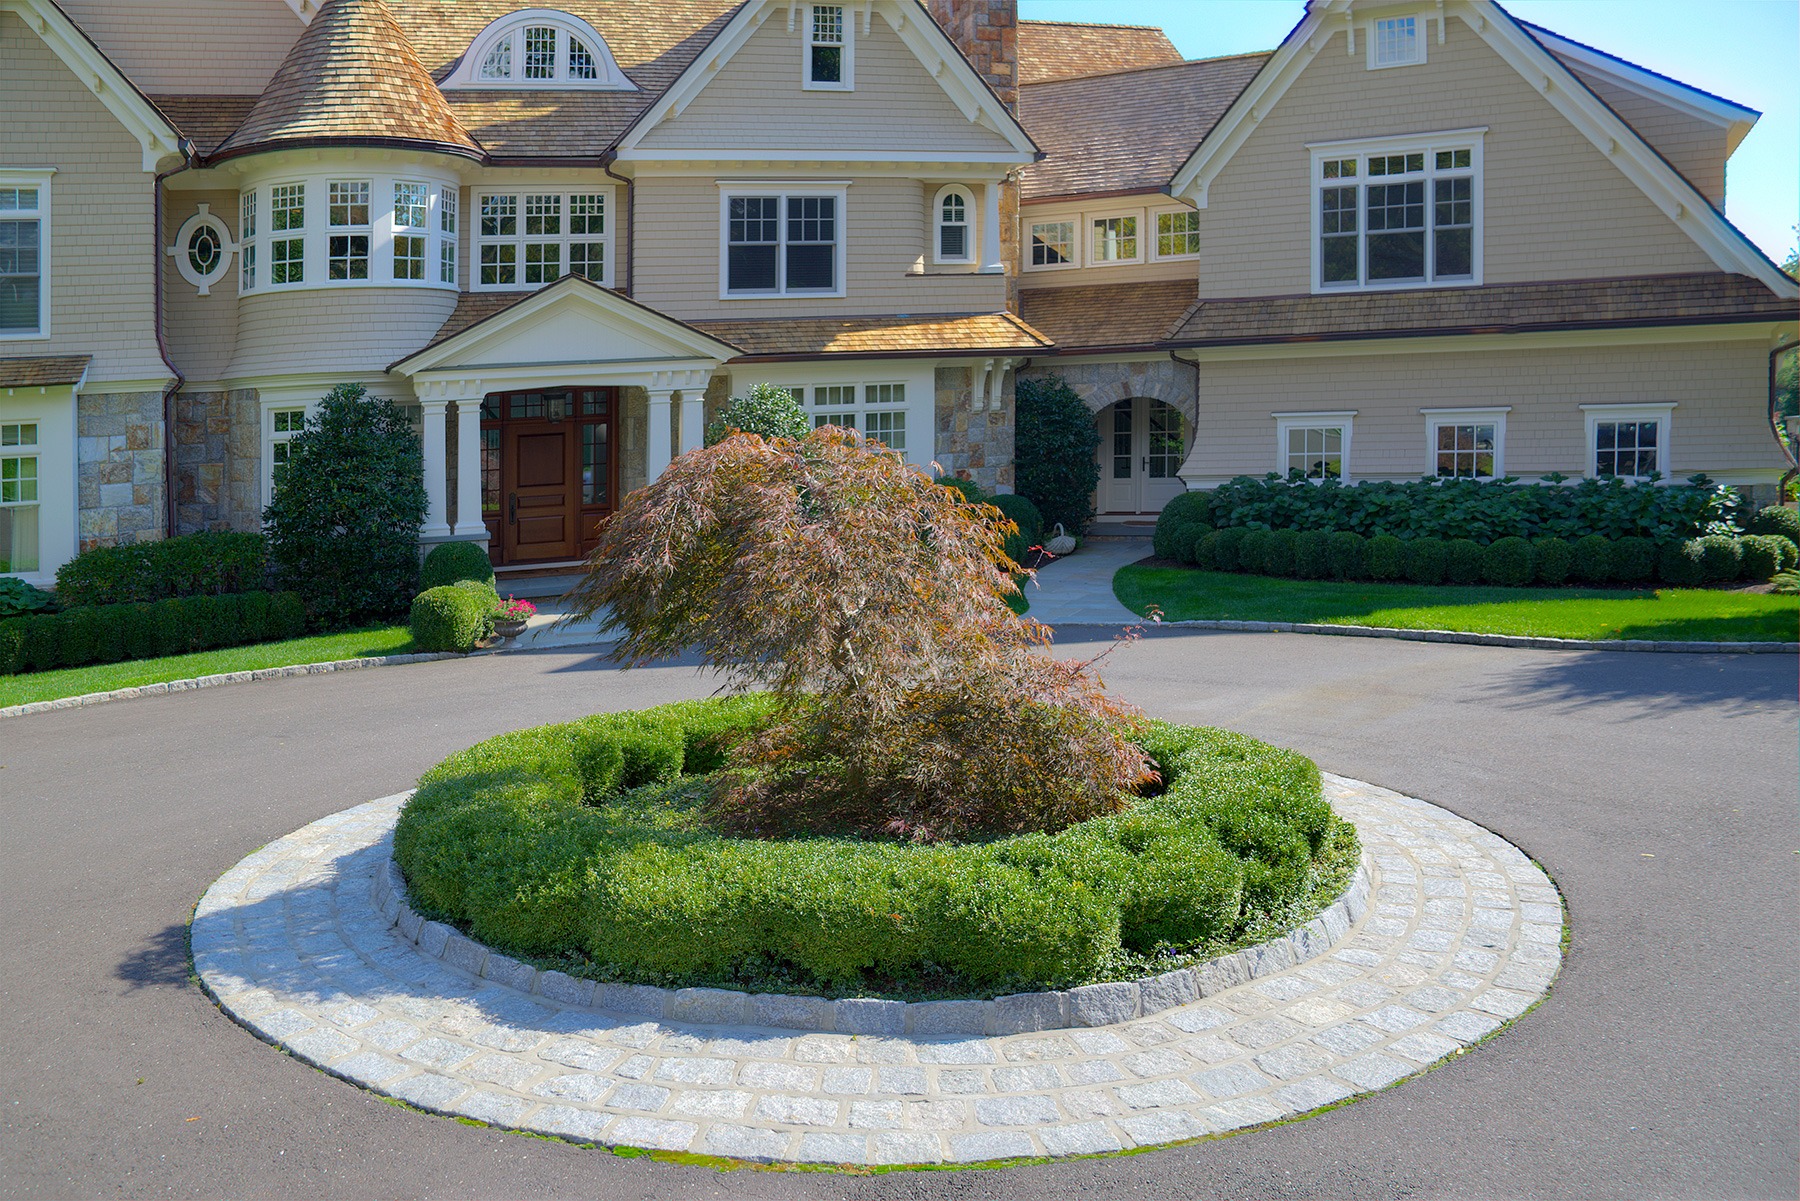 A large, elegant house with beige siding, white trim, a landscaped yard, circular driveway, and a central planter with a sculpted bush and tree.